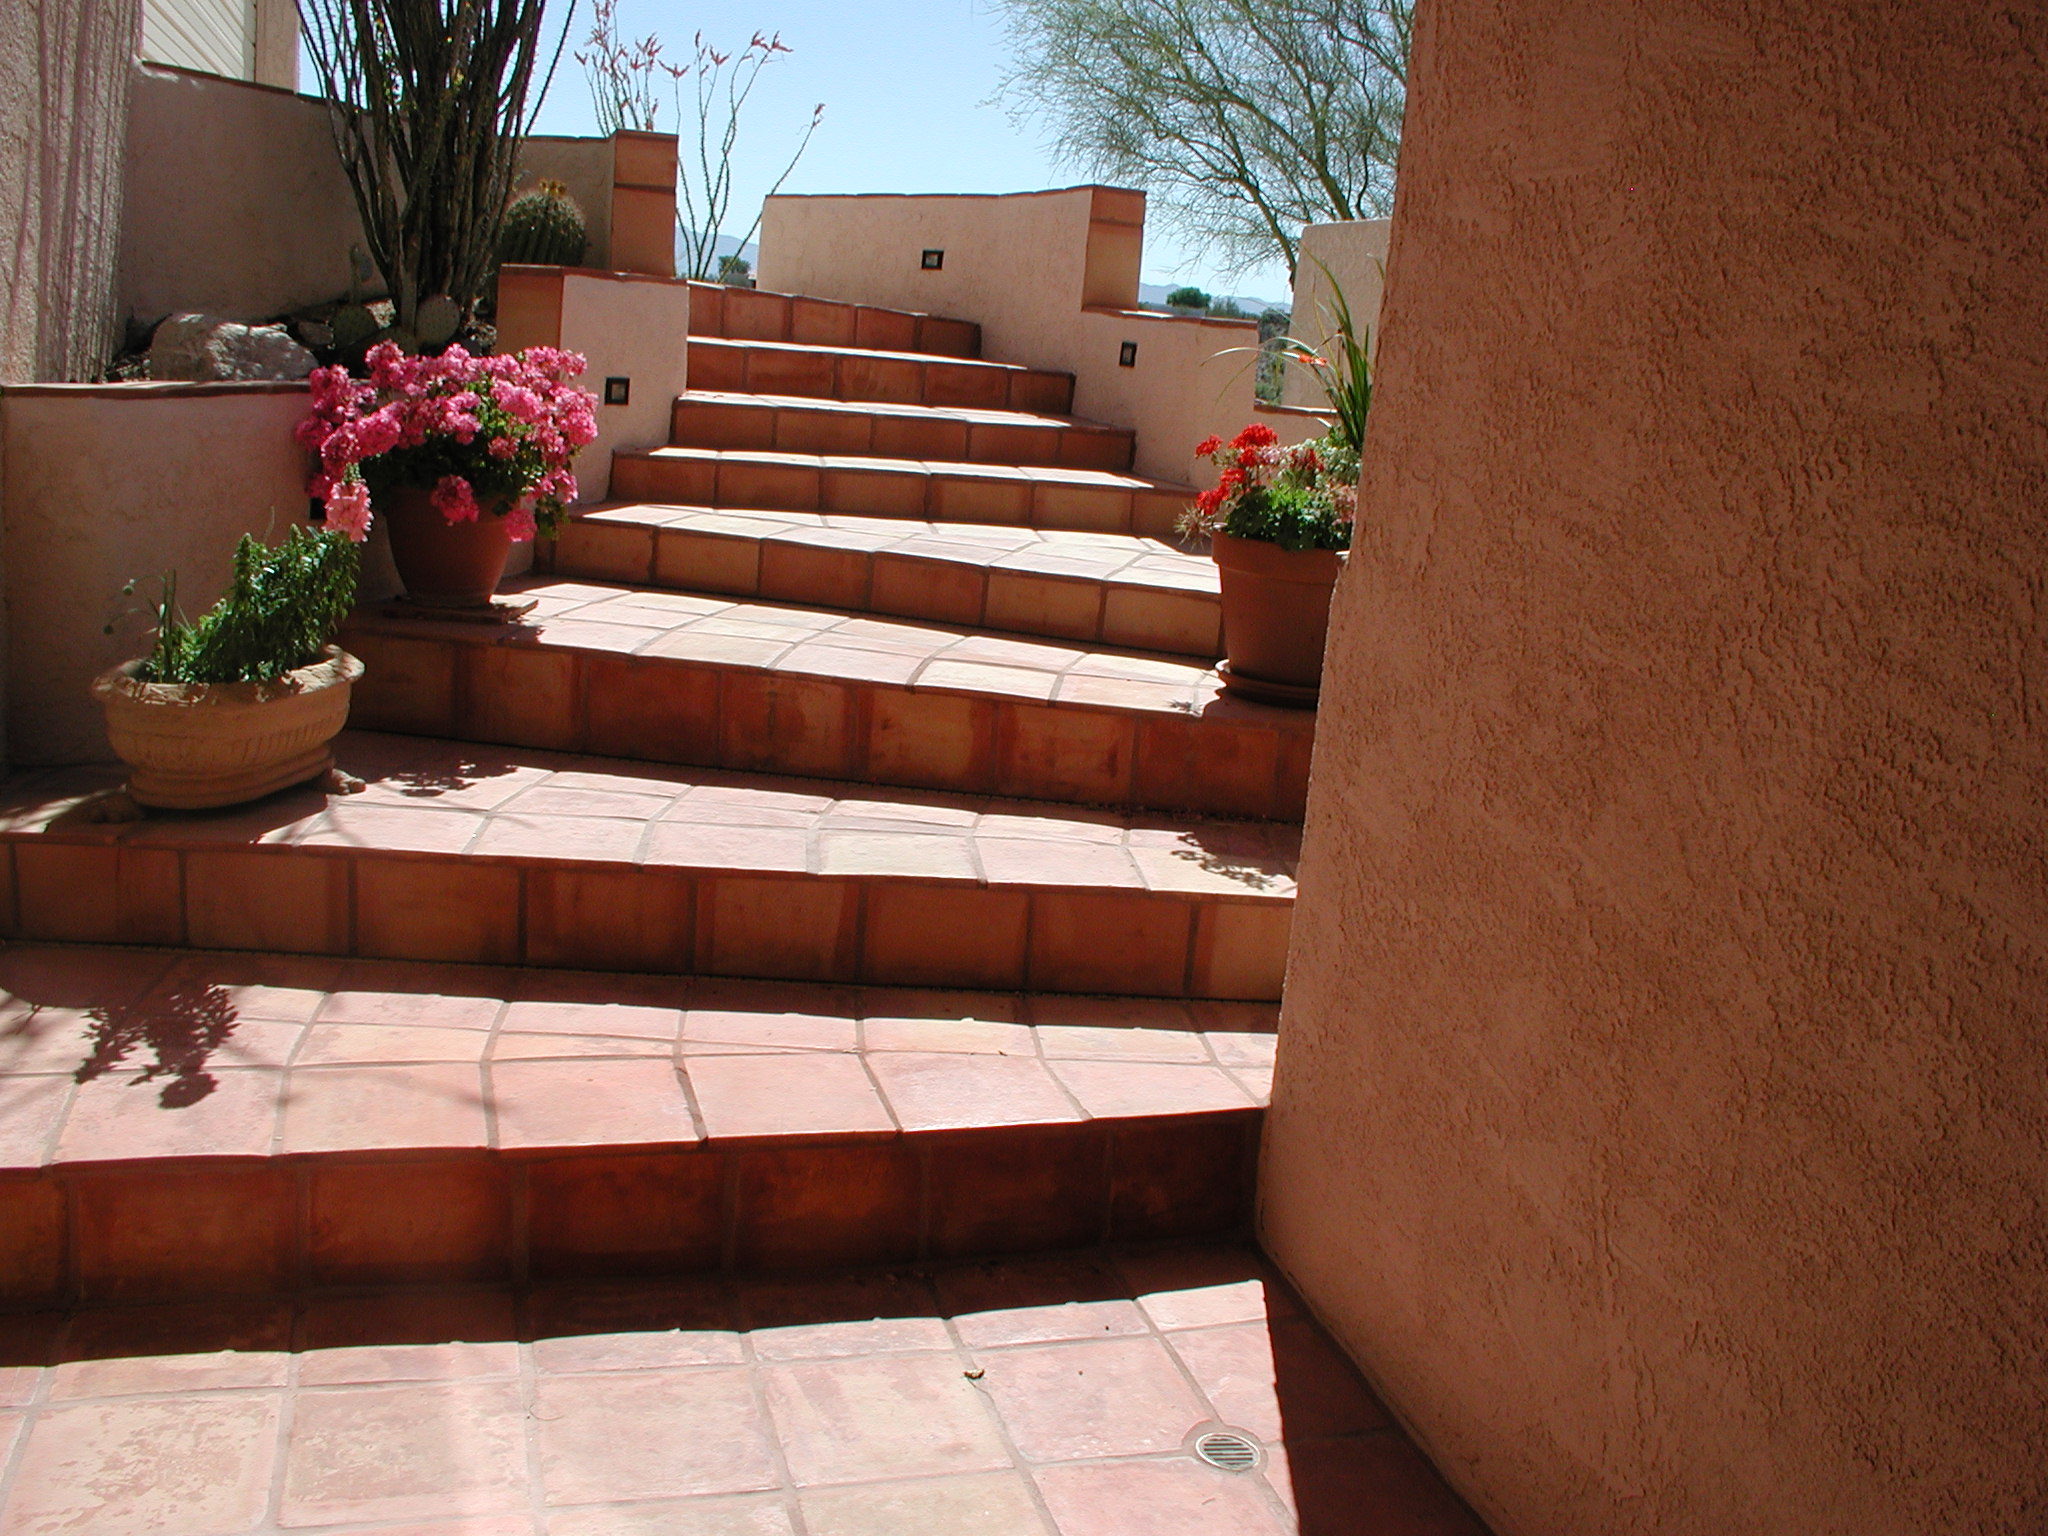 tiled exterior stairs image